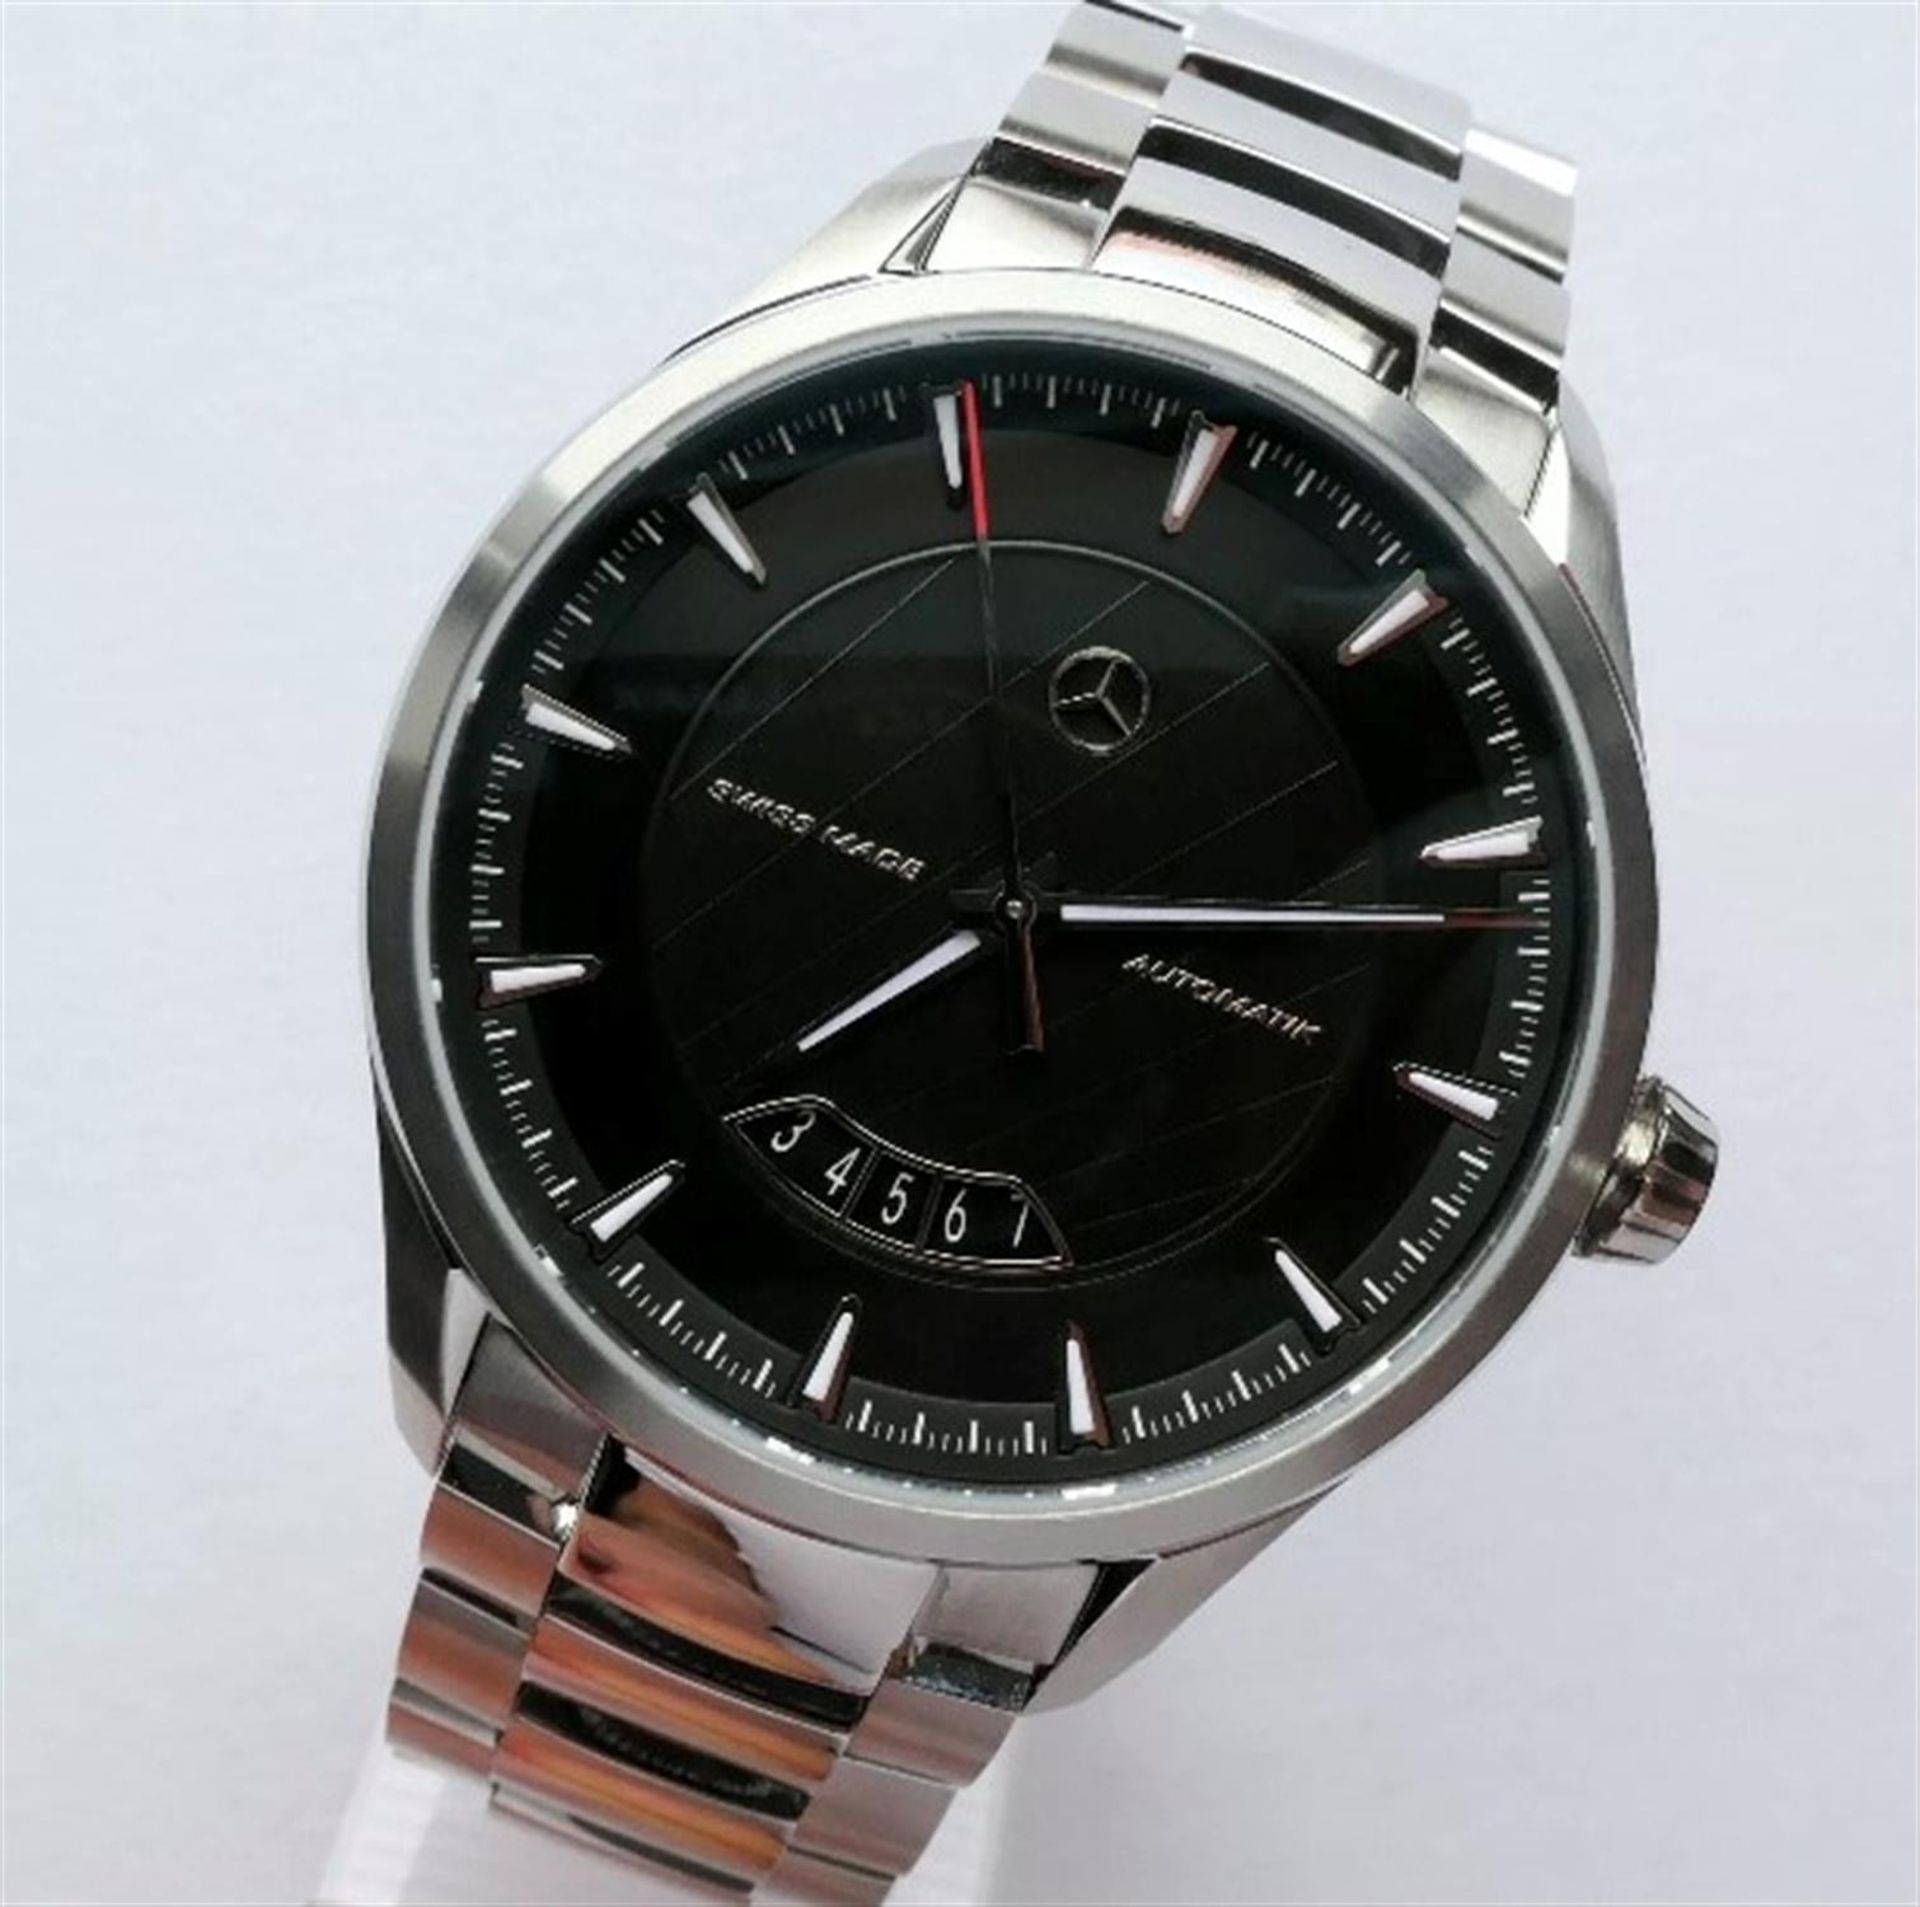 A Brand New Mercedes-Benz Classic Automatic Watch - Image 2 of 10